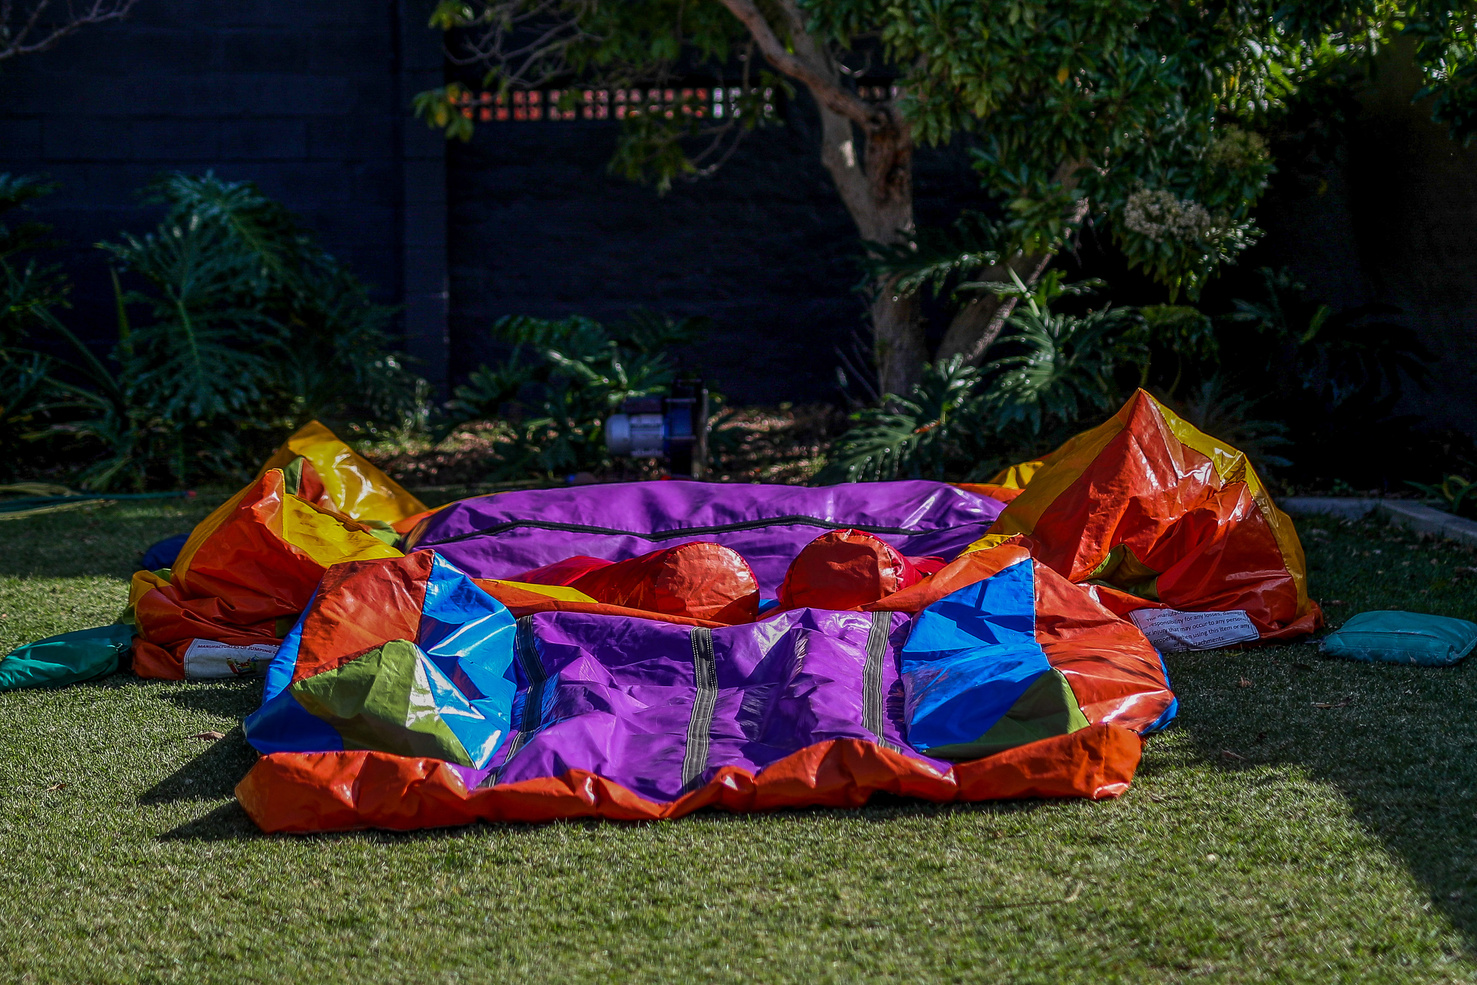 A deflated jumping castle.